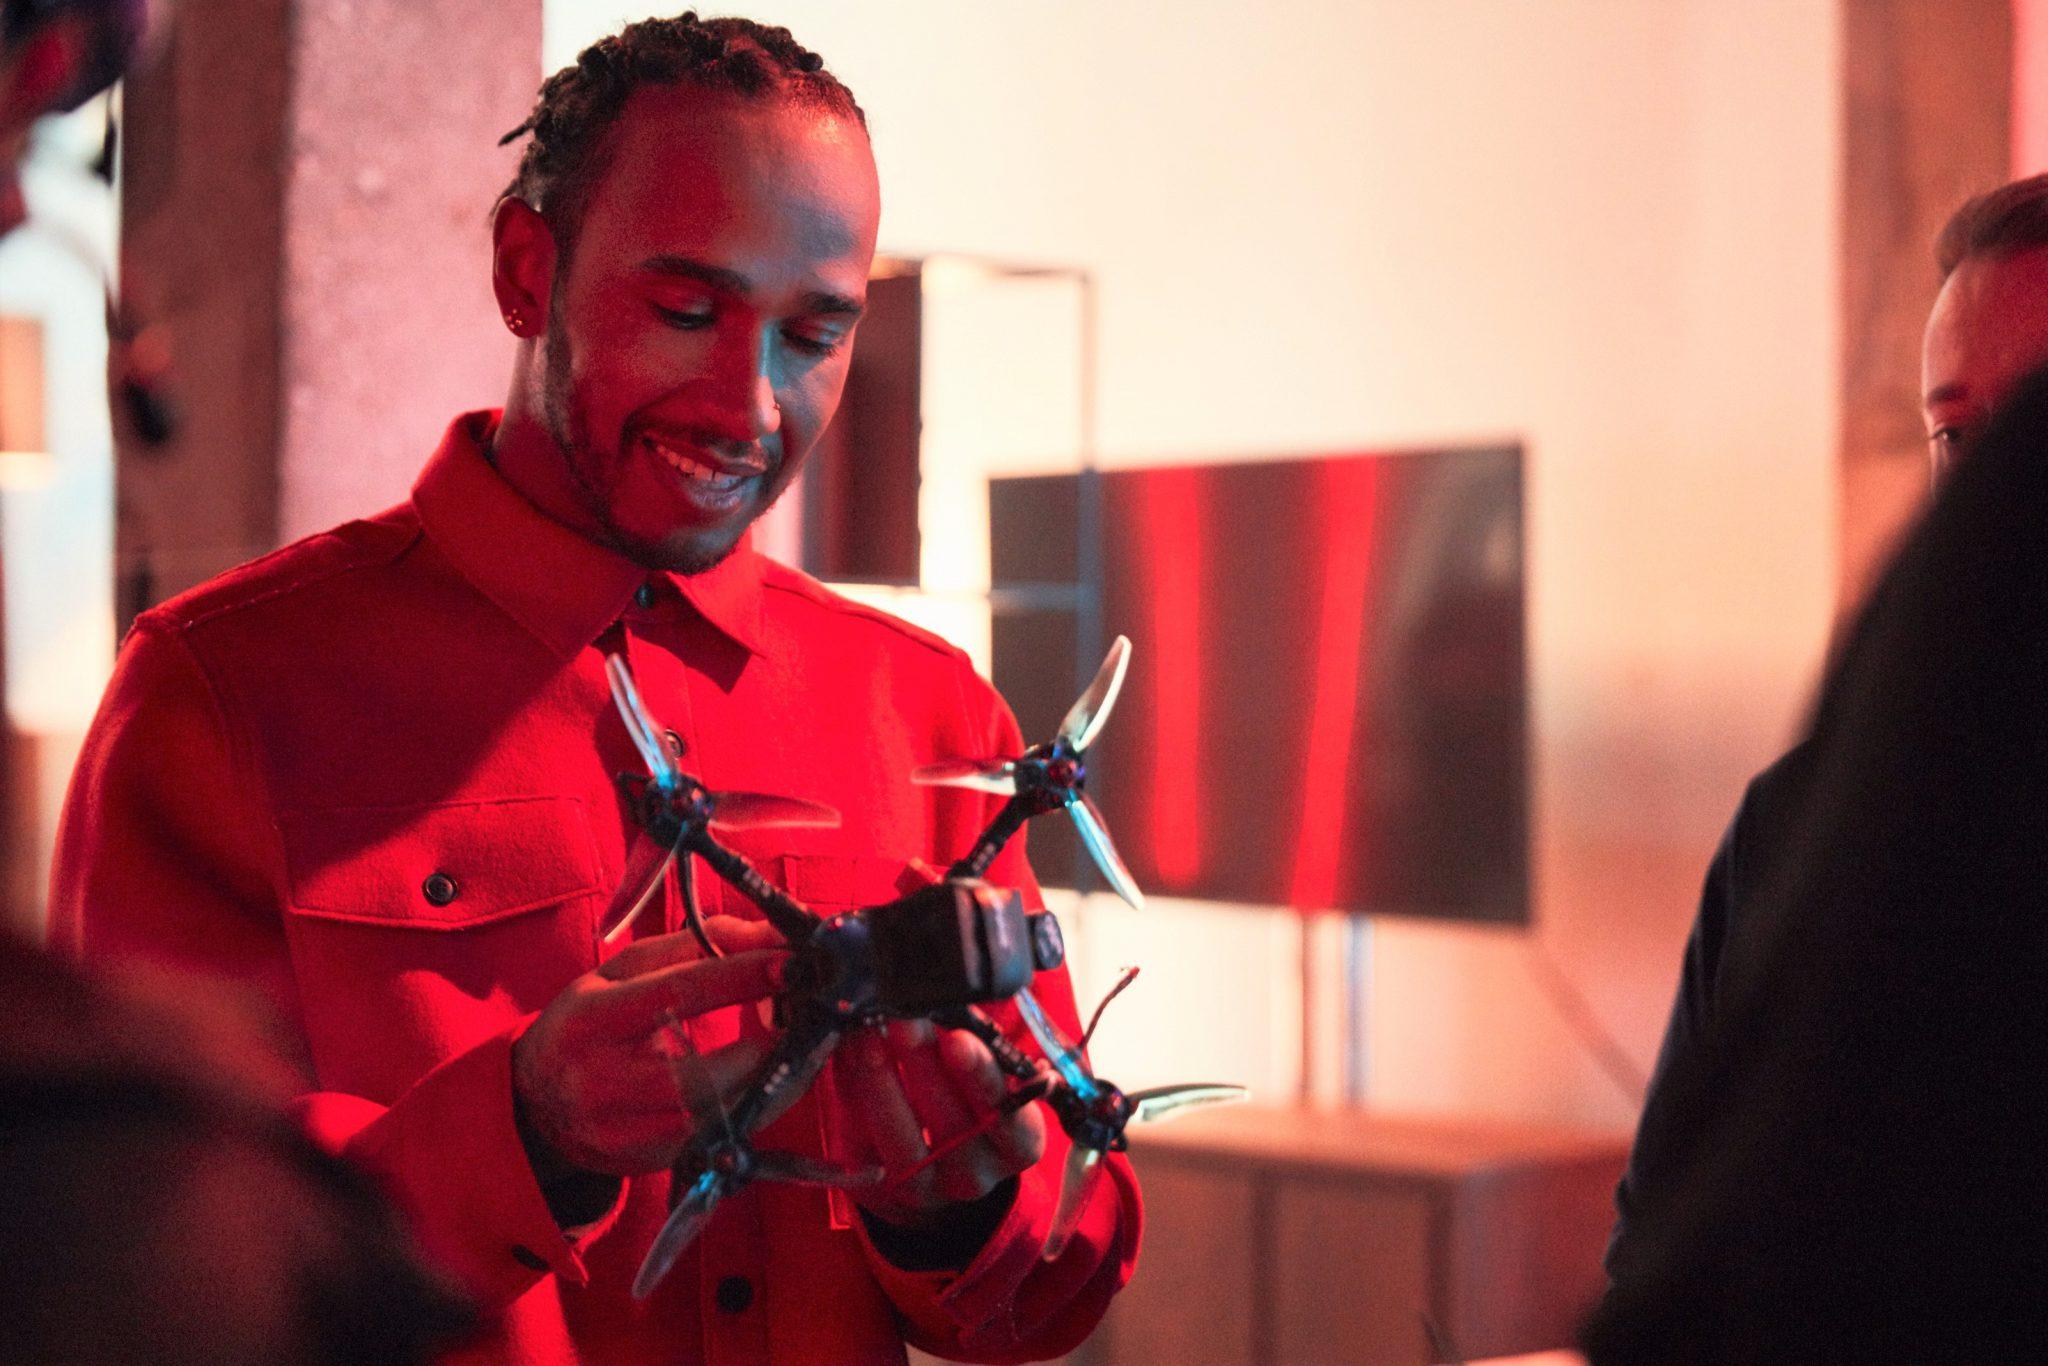 Product Lewis Hamilton on 5G, drones, gaming, and going green - Vodafone UK News Centre image